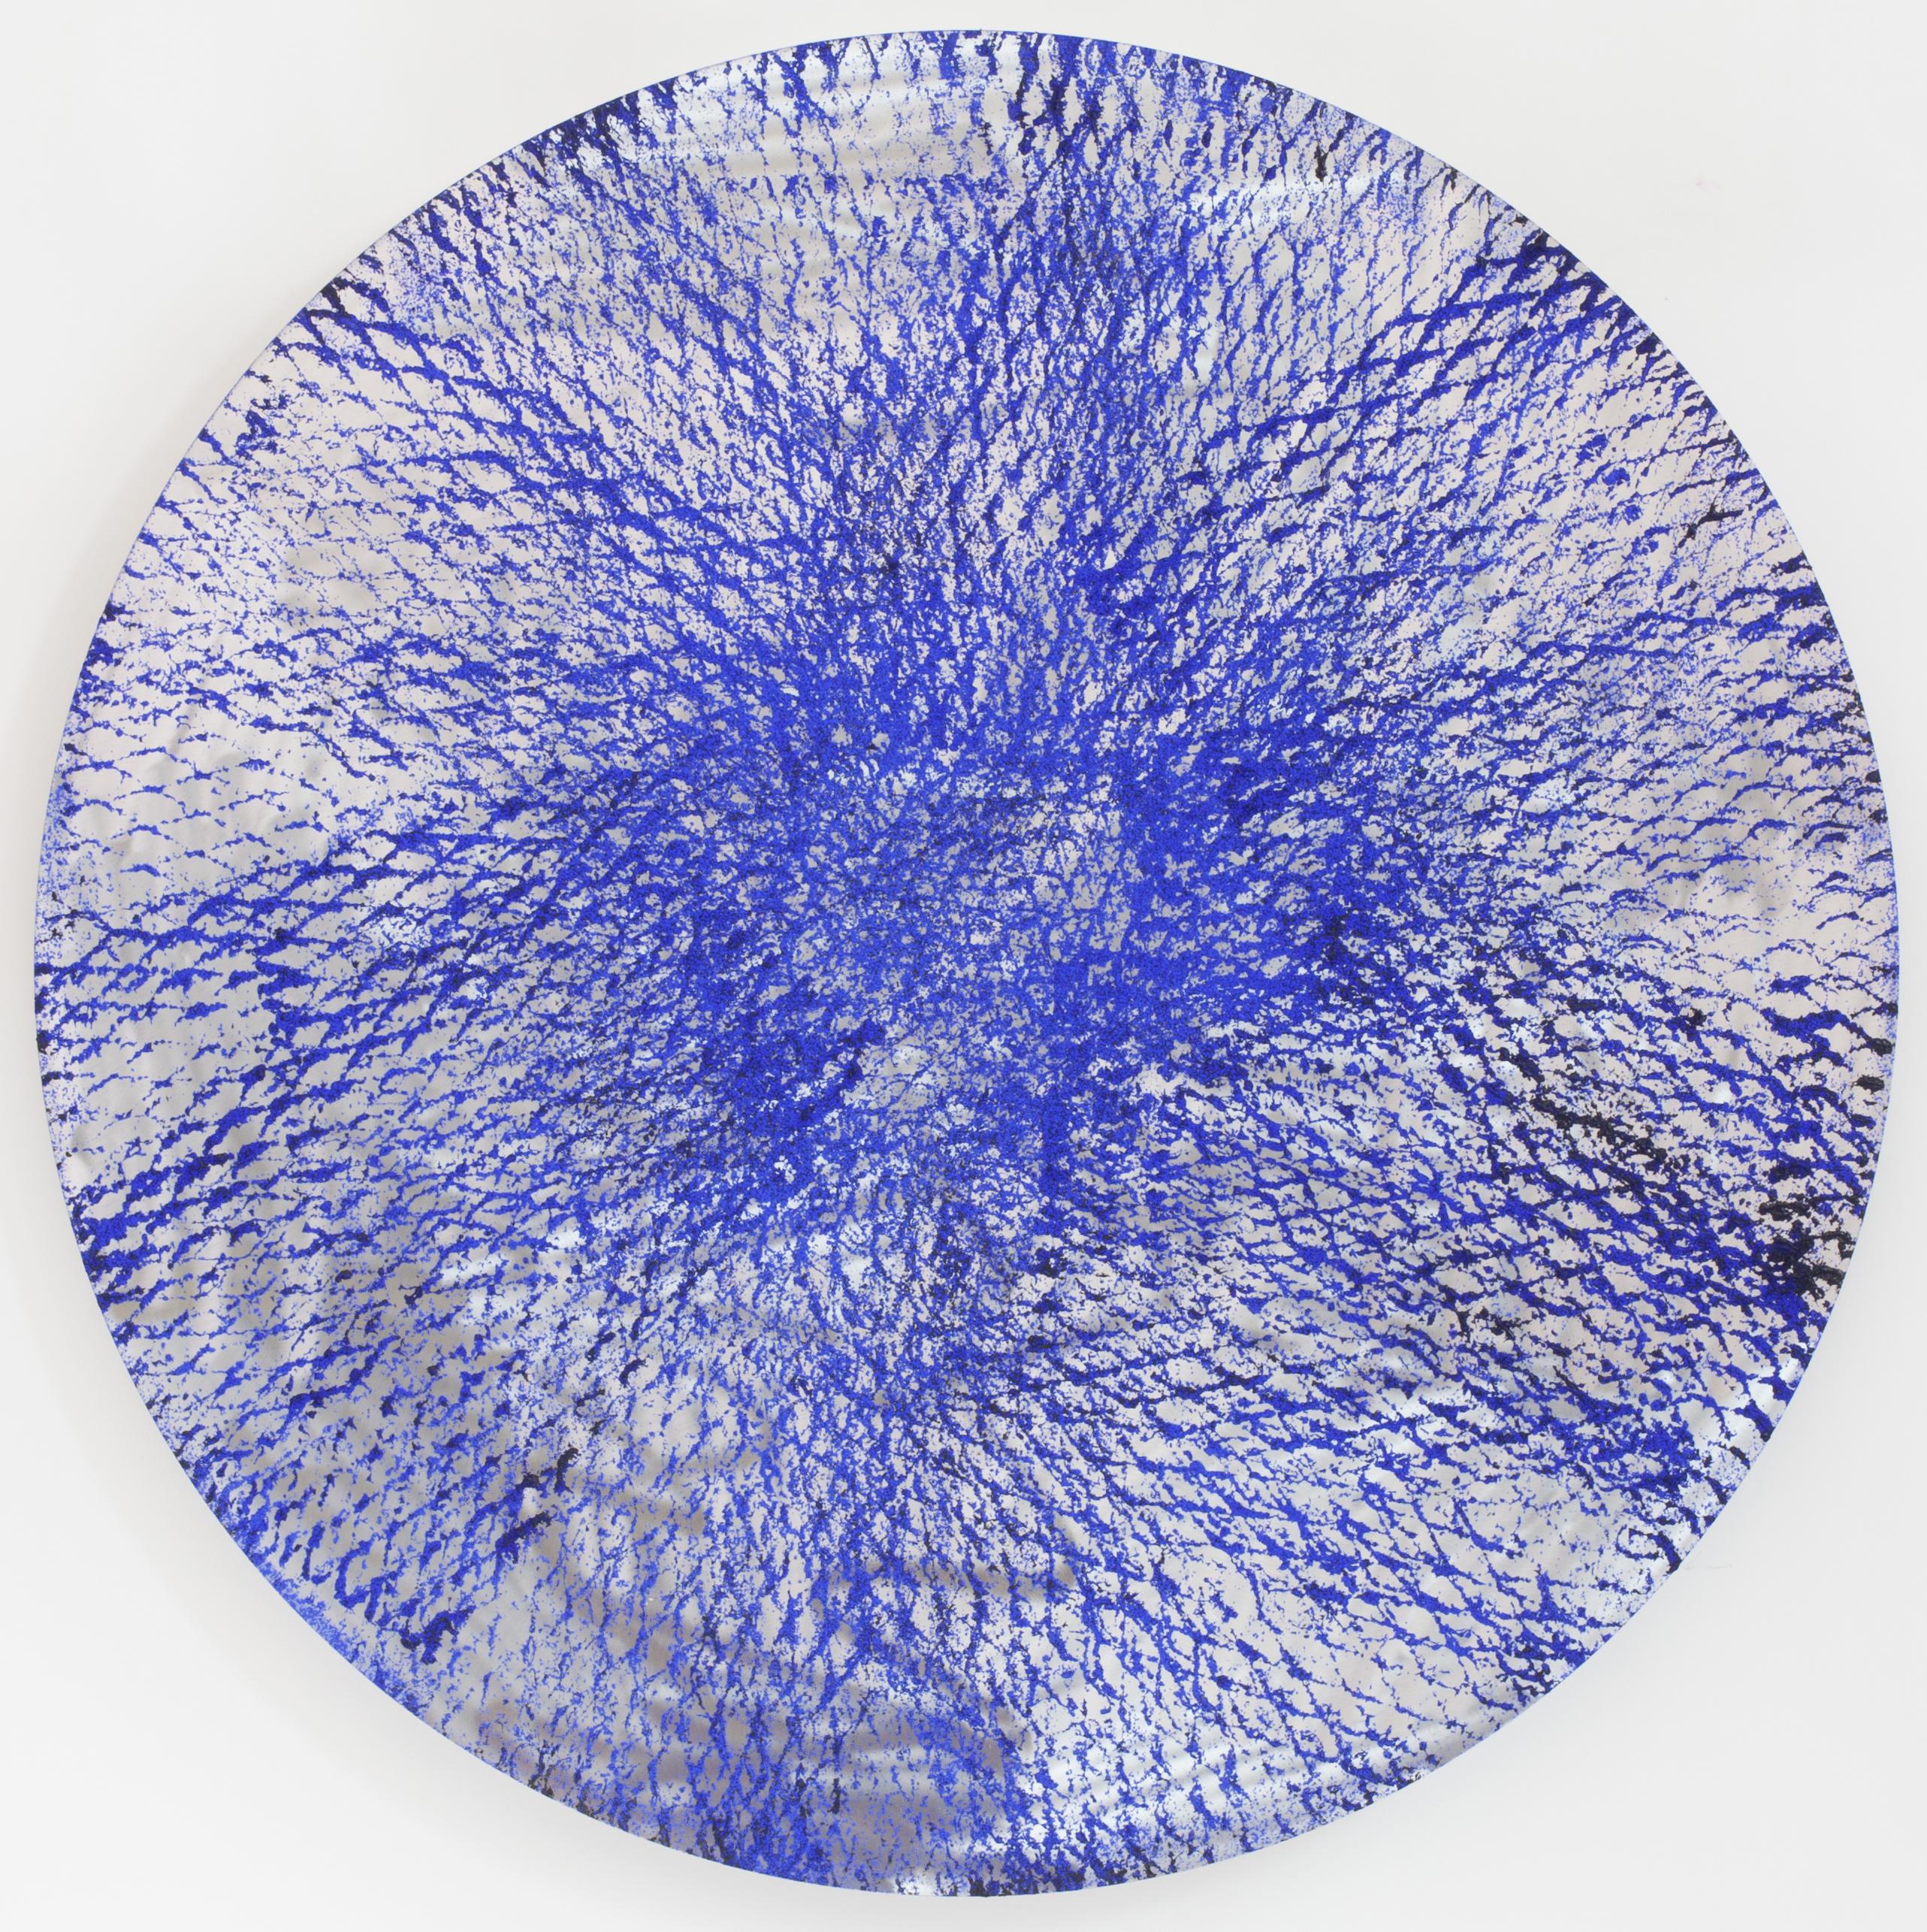 Tondo Blue, Expanded Metal Painting